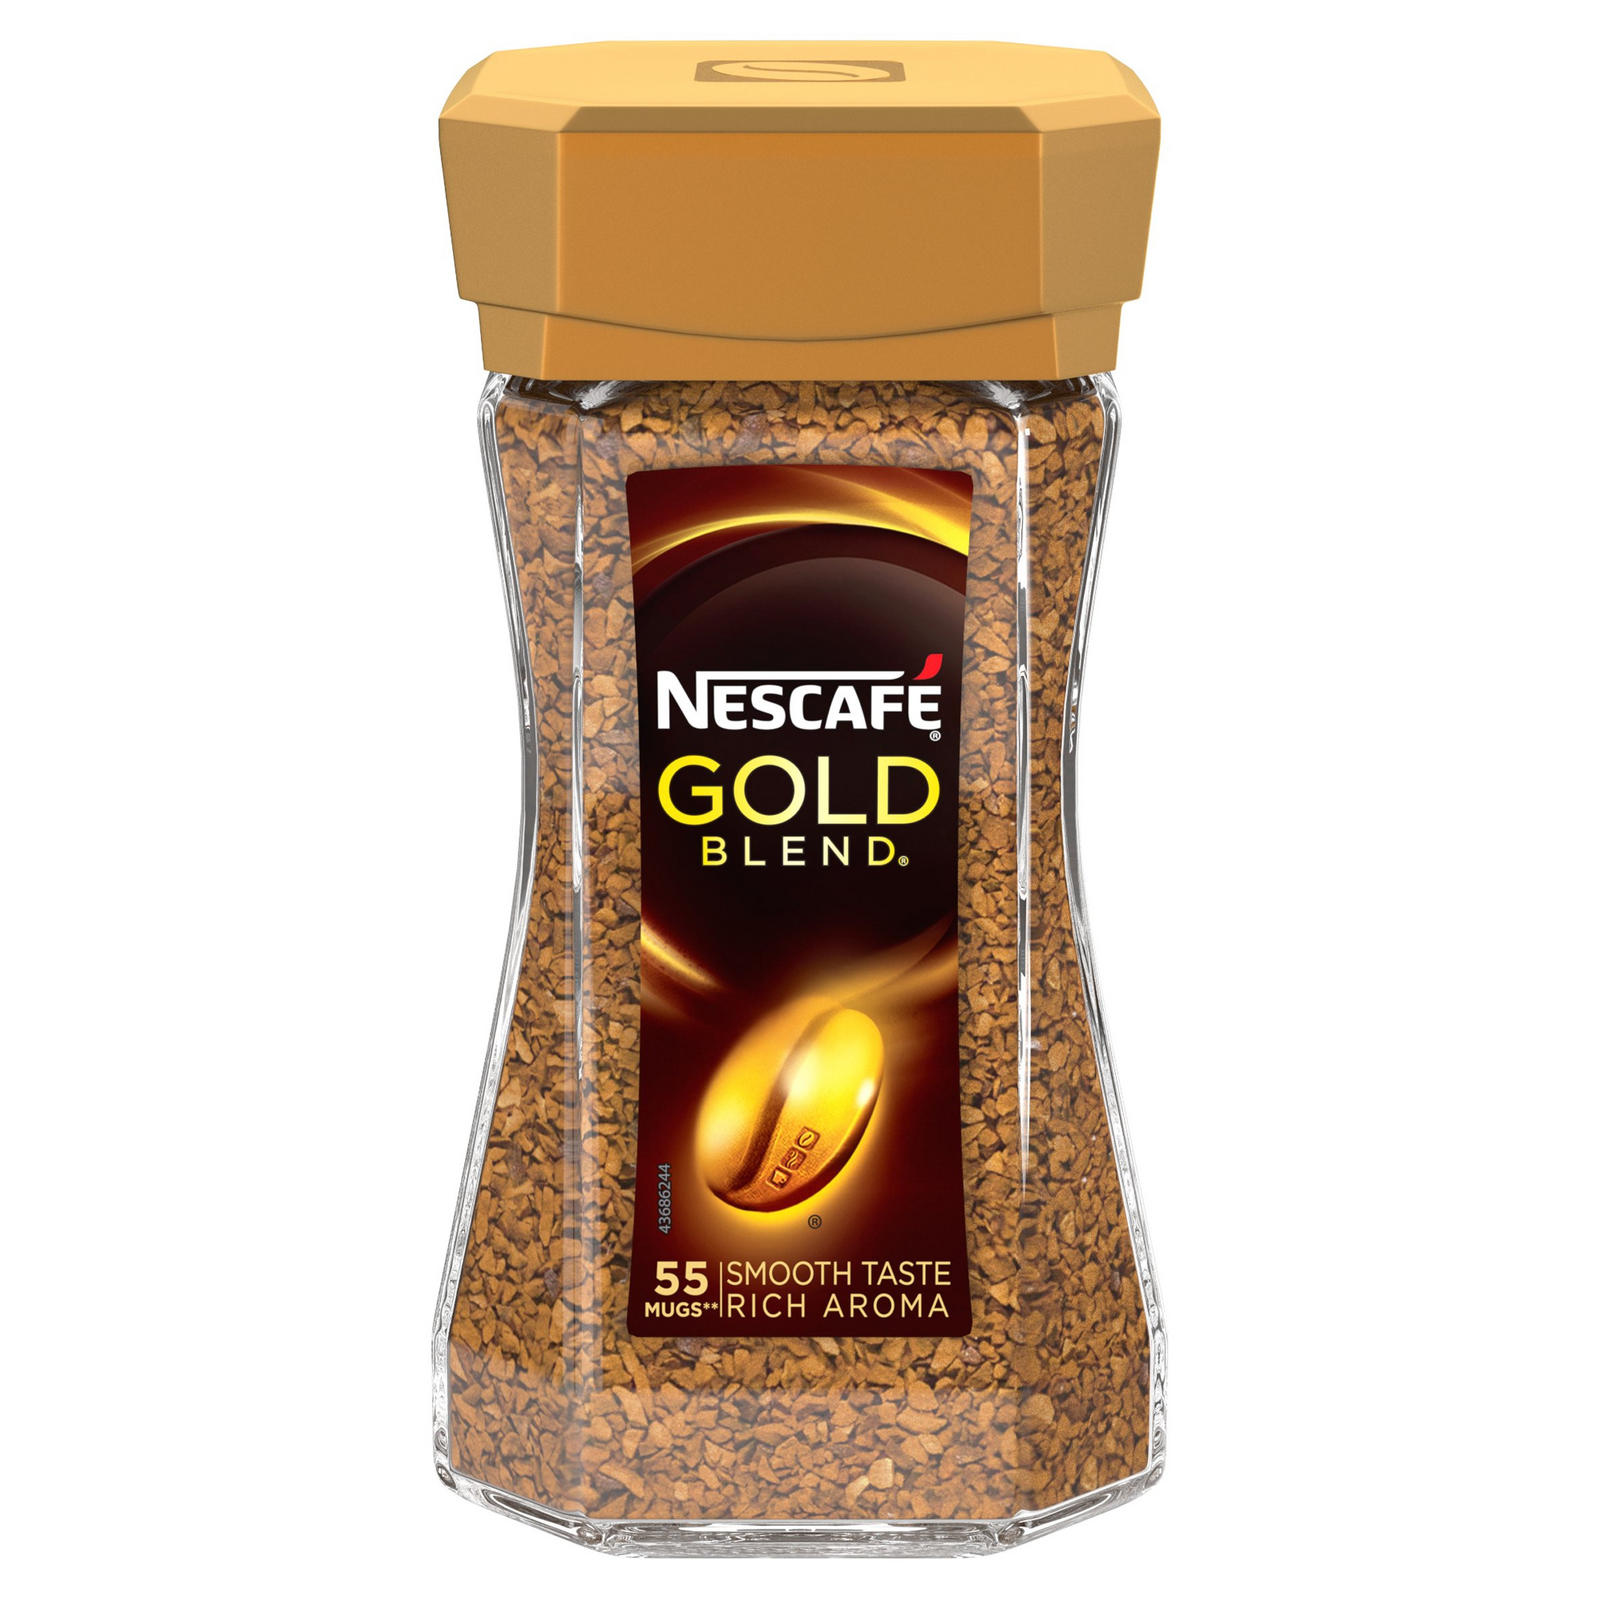 NESCAFE GOLD BLEND Instant Coffee 100g - Instant & Ground Coffee ...